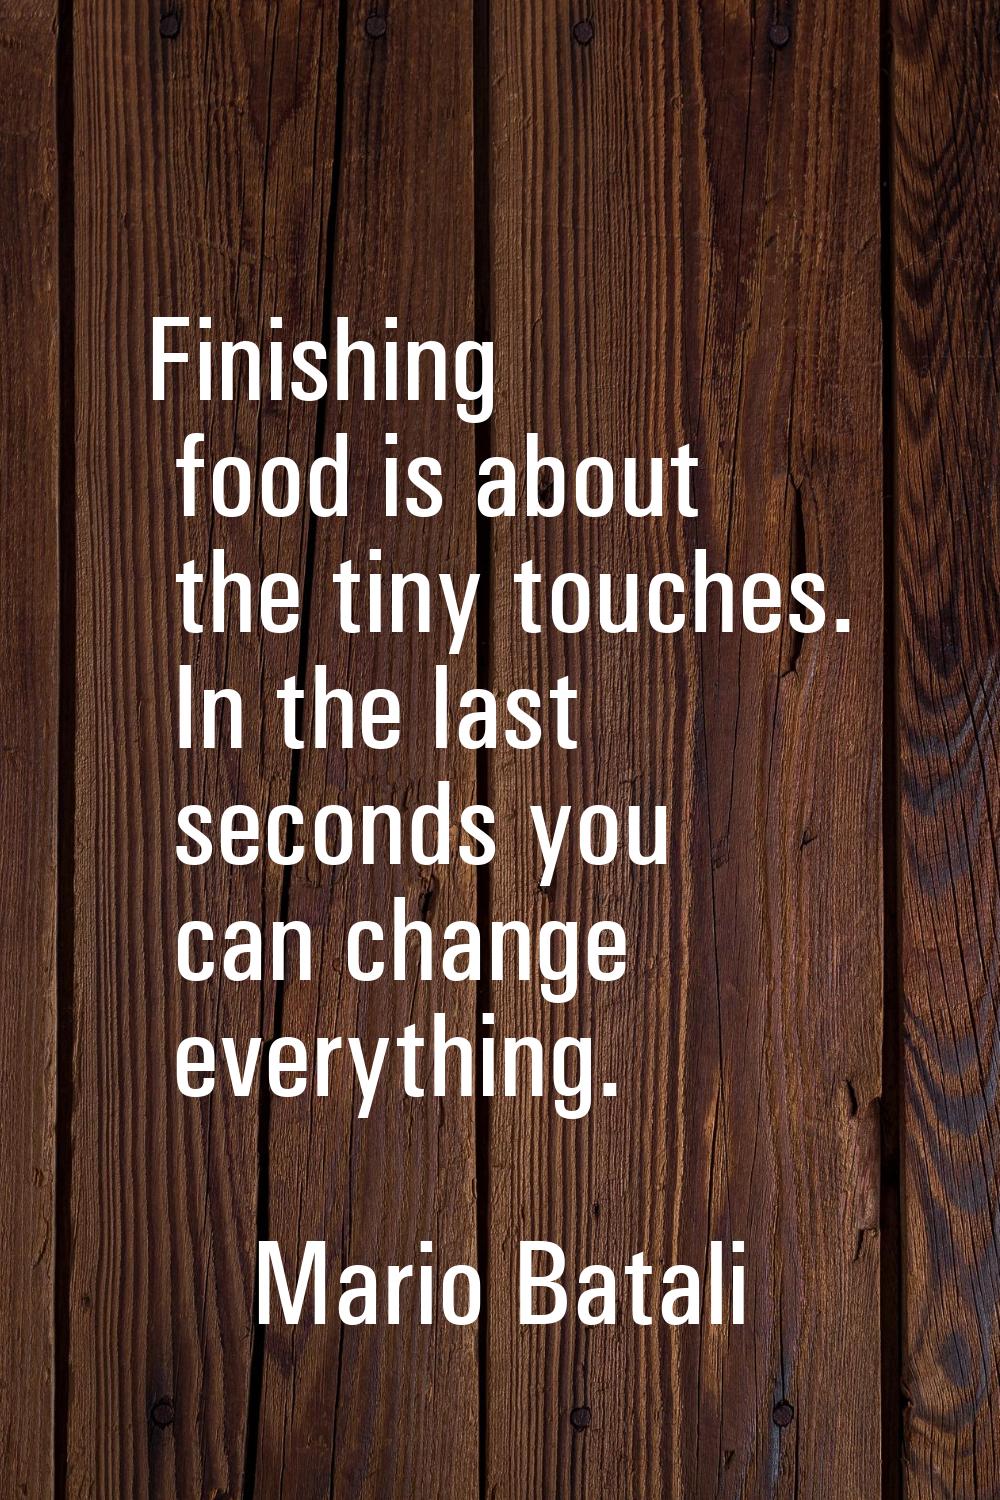 Finishing food is about the tiny touches. In the last seconds you can change everything.